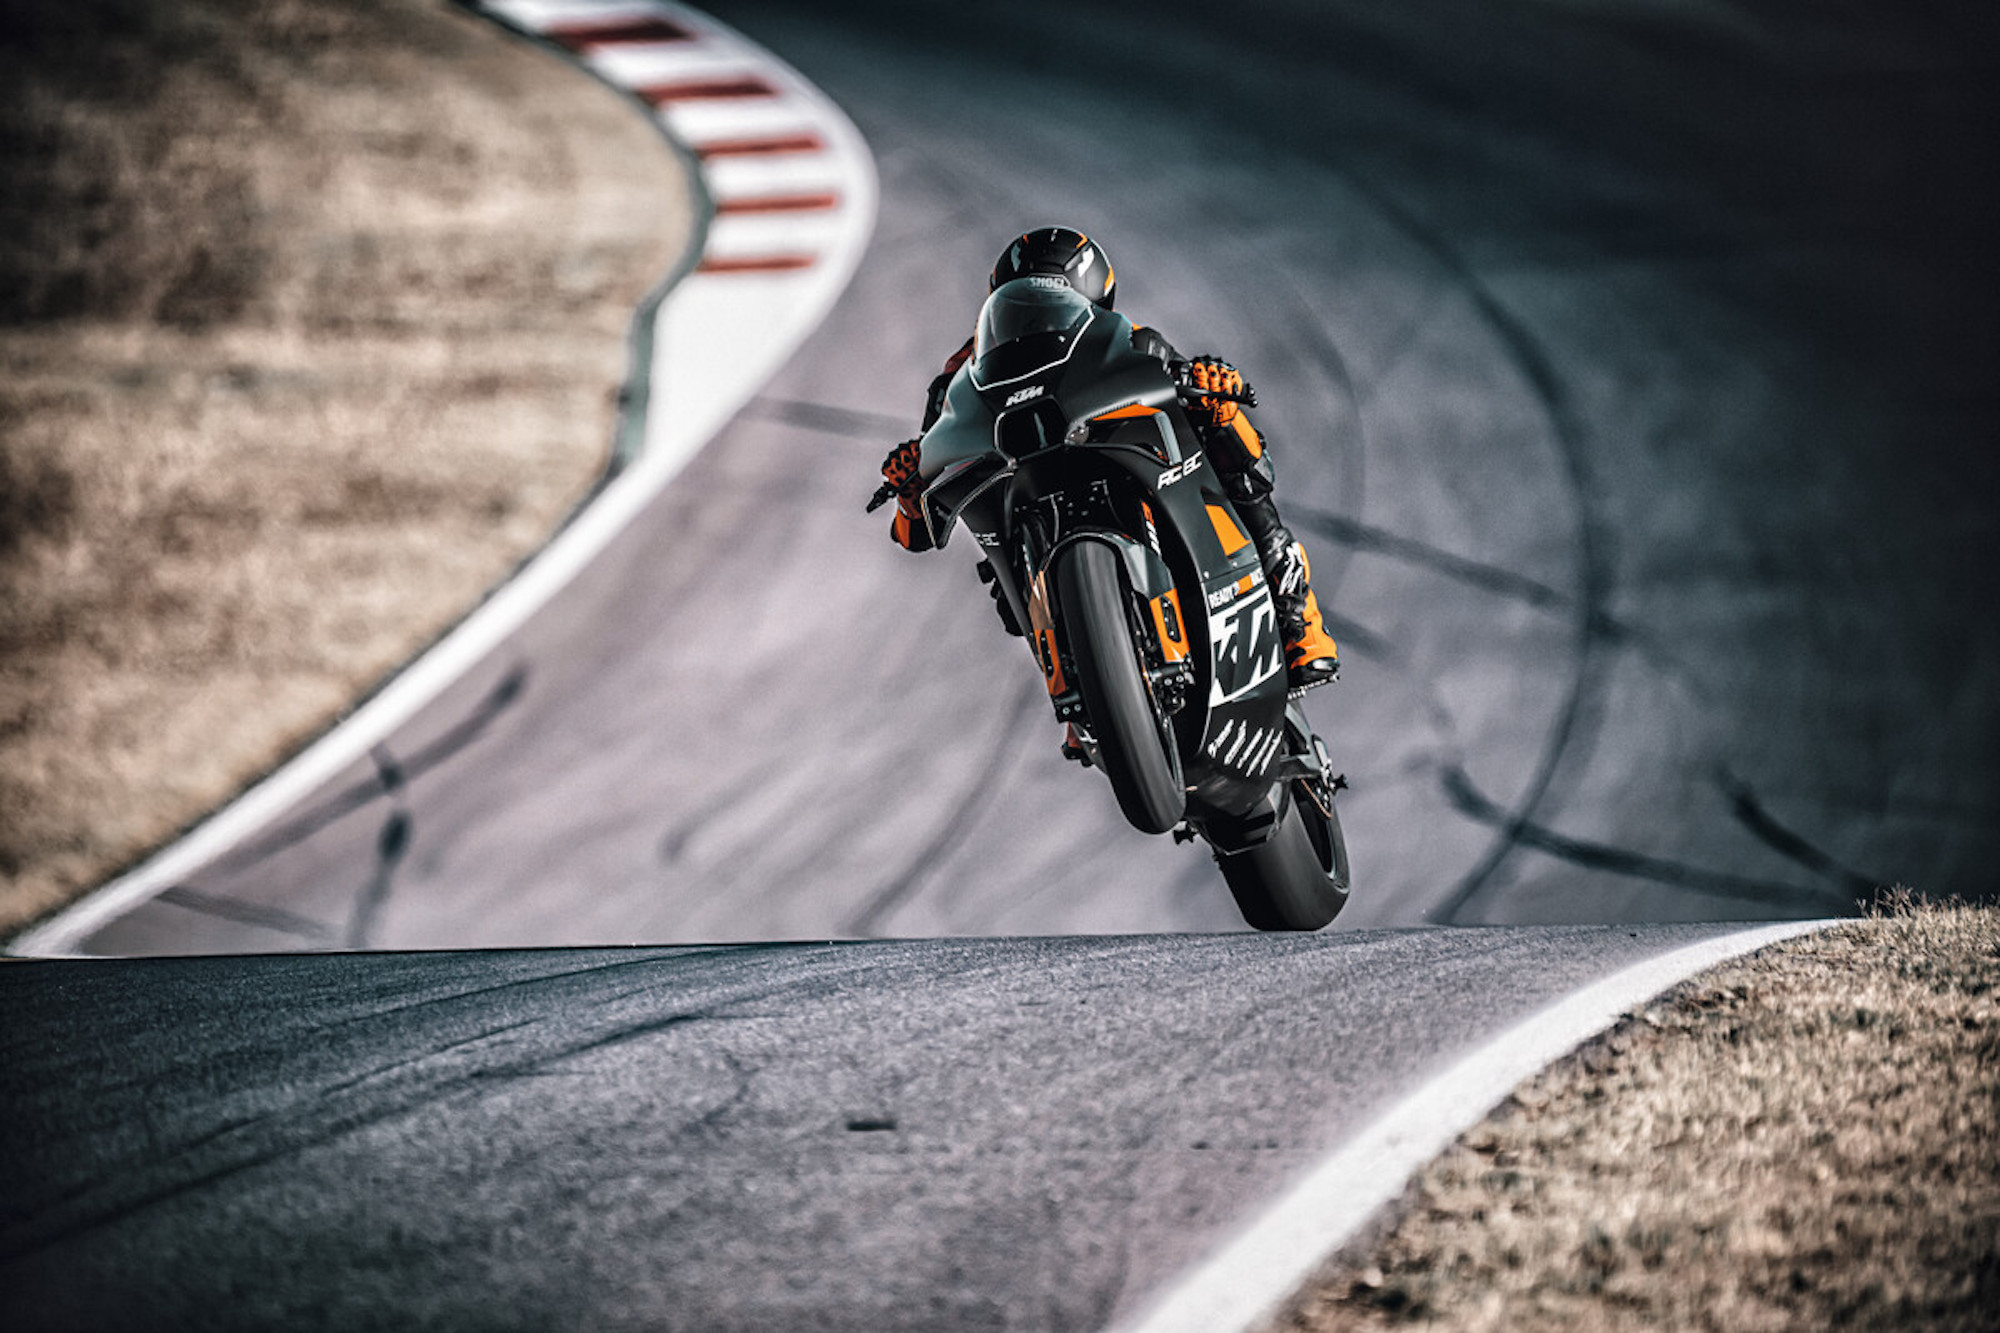 KTM's monstrosity: The beautiful RC 8C. Media sourced from KTM's press release.